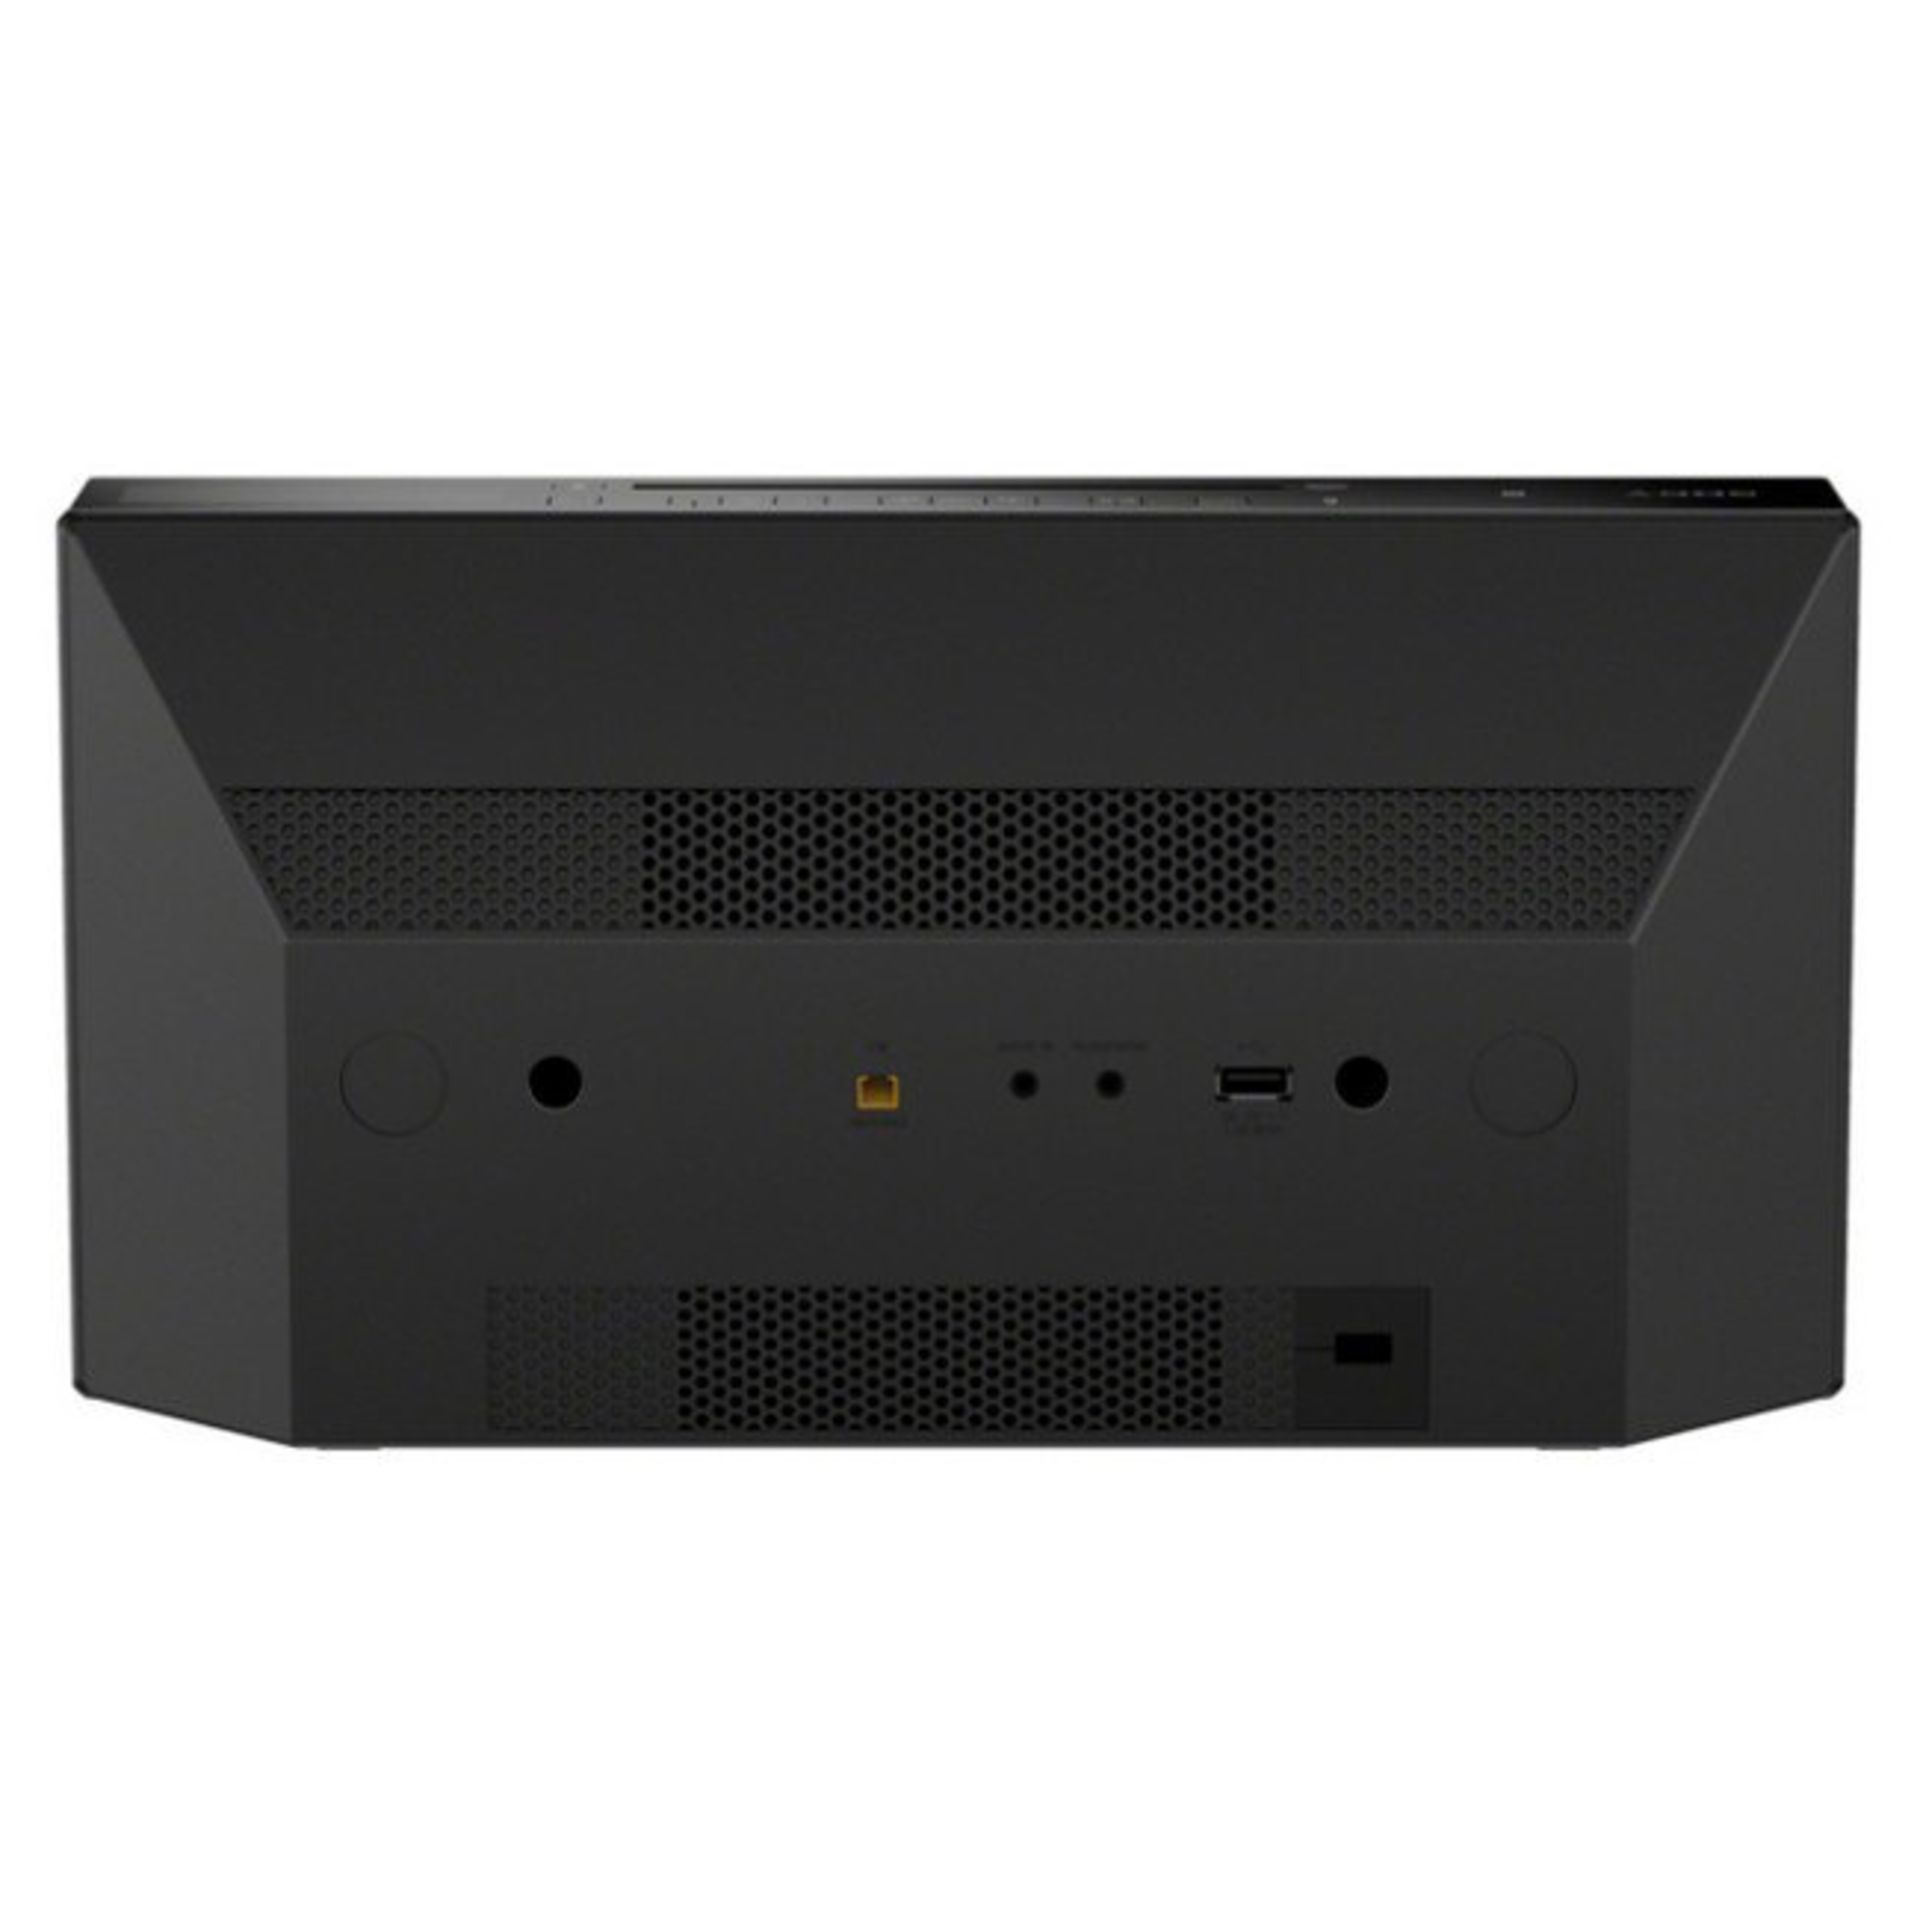 A1 PRODUCT NEW - SONY CMT-X3CD MICRO, CD/BLUETOOTH/NFC HIFI SYSTEM IN BLACK - RRP Ã‚Â£239 - Image 3 of 4